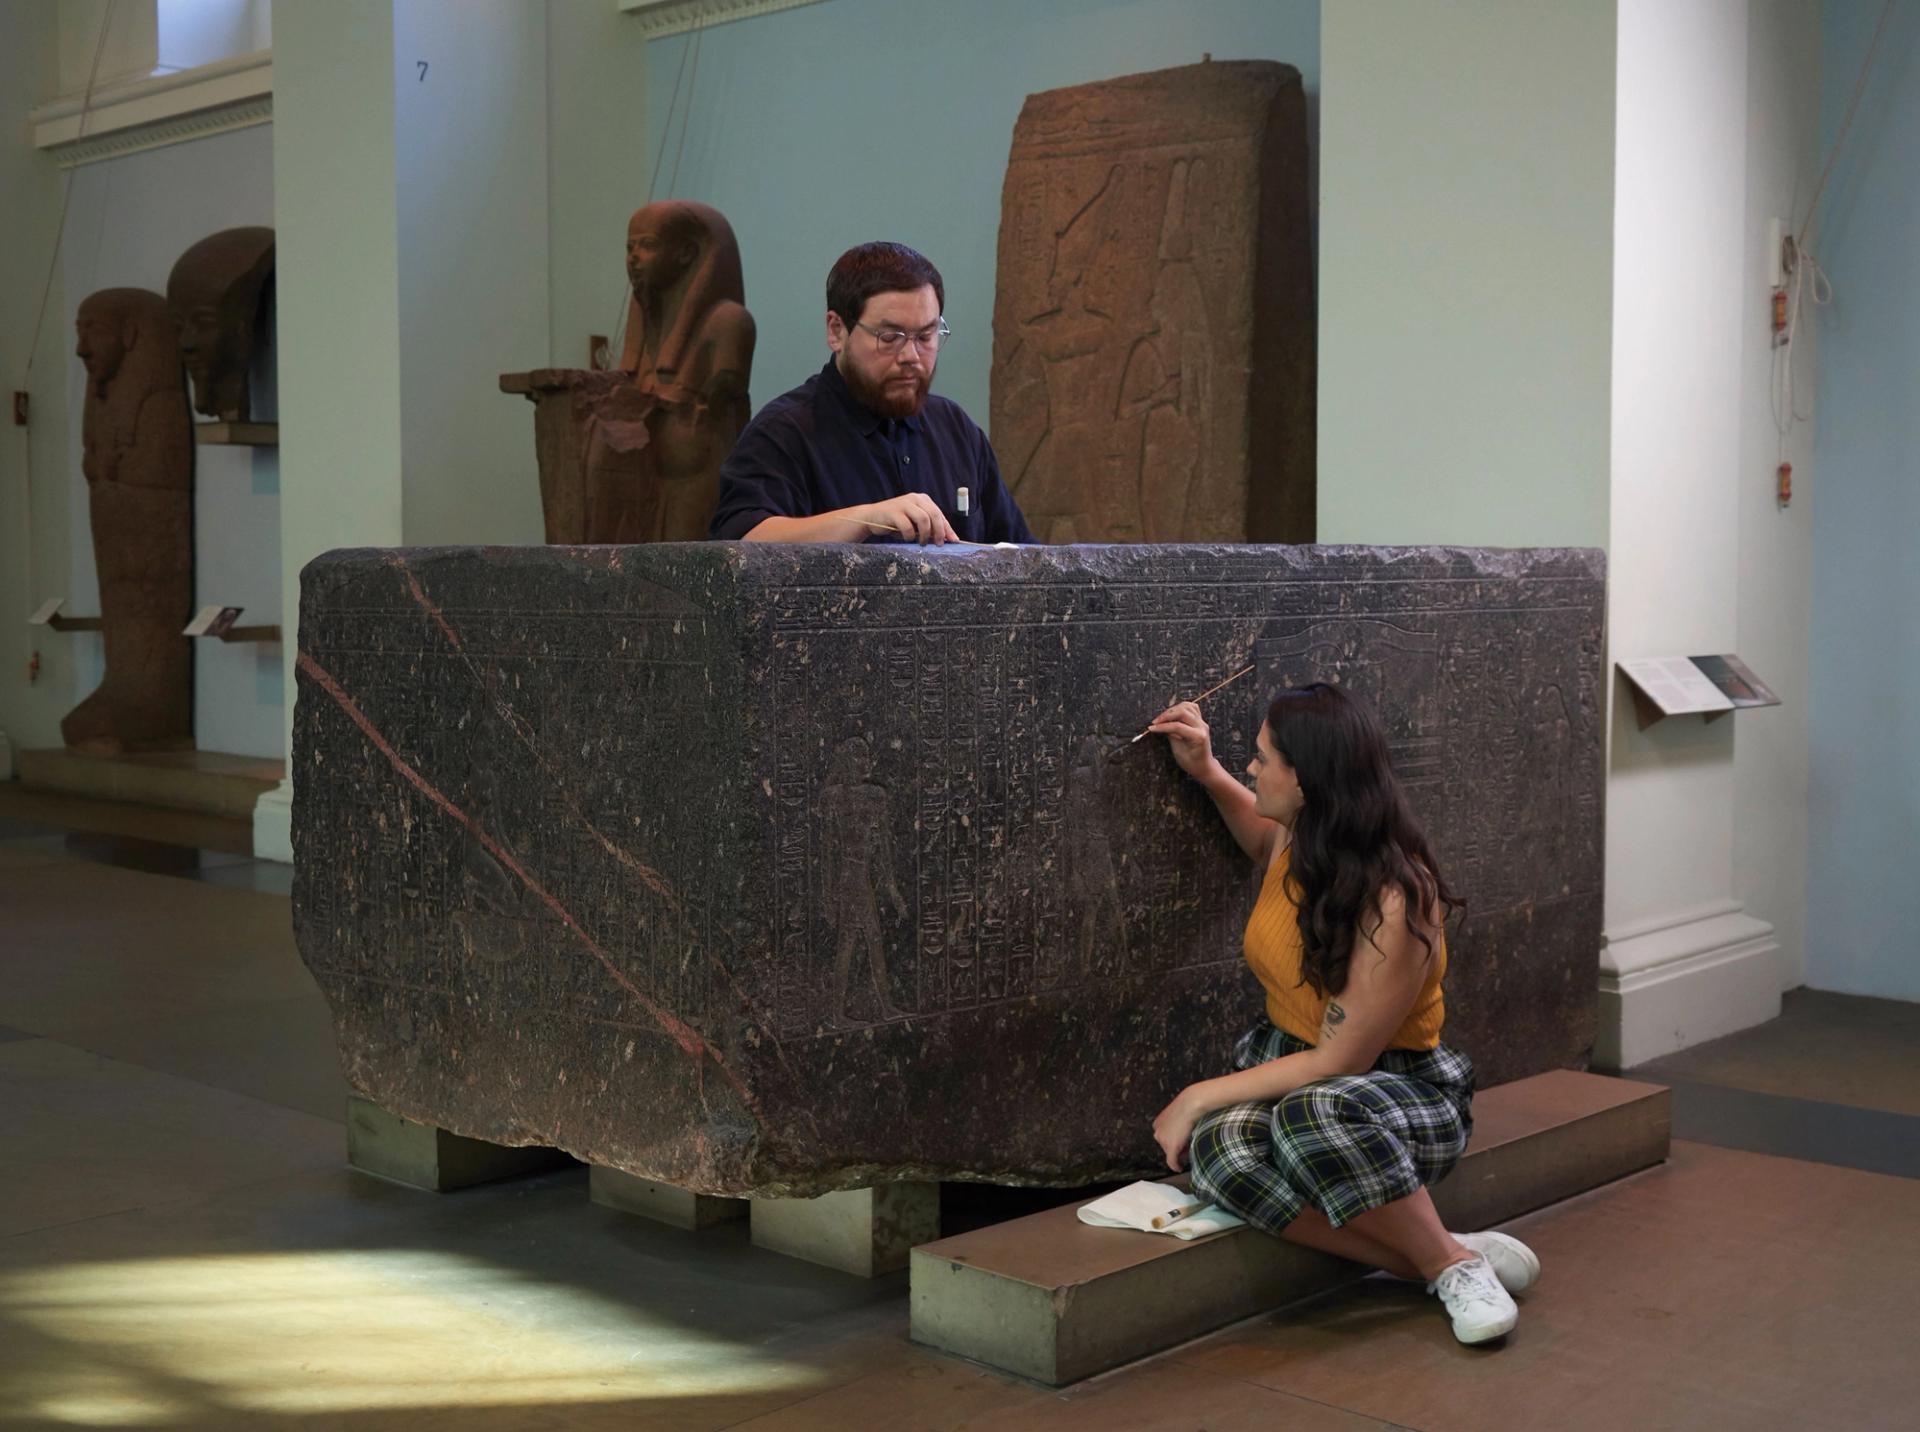 <p class="font_7"><a href="https://www.theartnewspaper.com/2022/10/11/british-museums-cracking-tale-of-ancient-egyptian-code-scholarly-rivalry-sex-and-a-magic-bath"><u>British Museum's cracking tale of ancient Egyptian code, scholarly rivalry, sex and a magic bath</u></a></p>